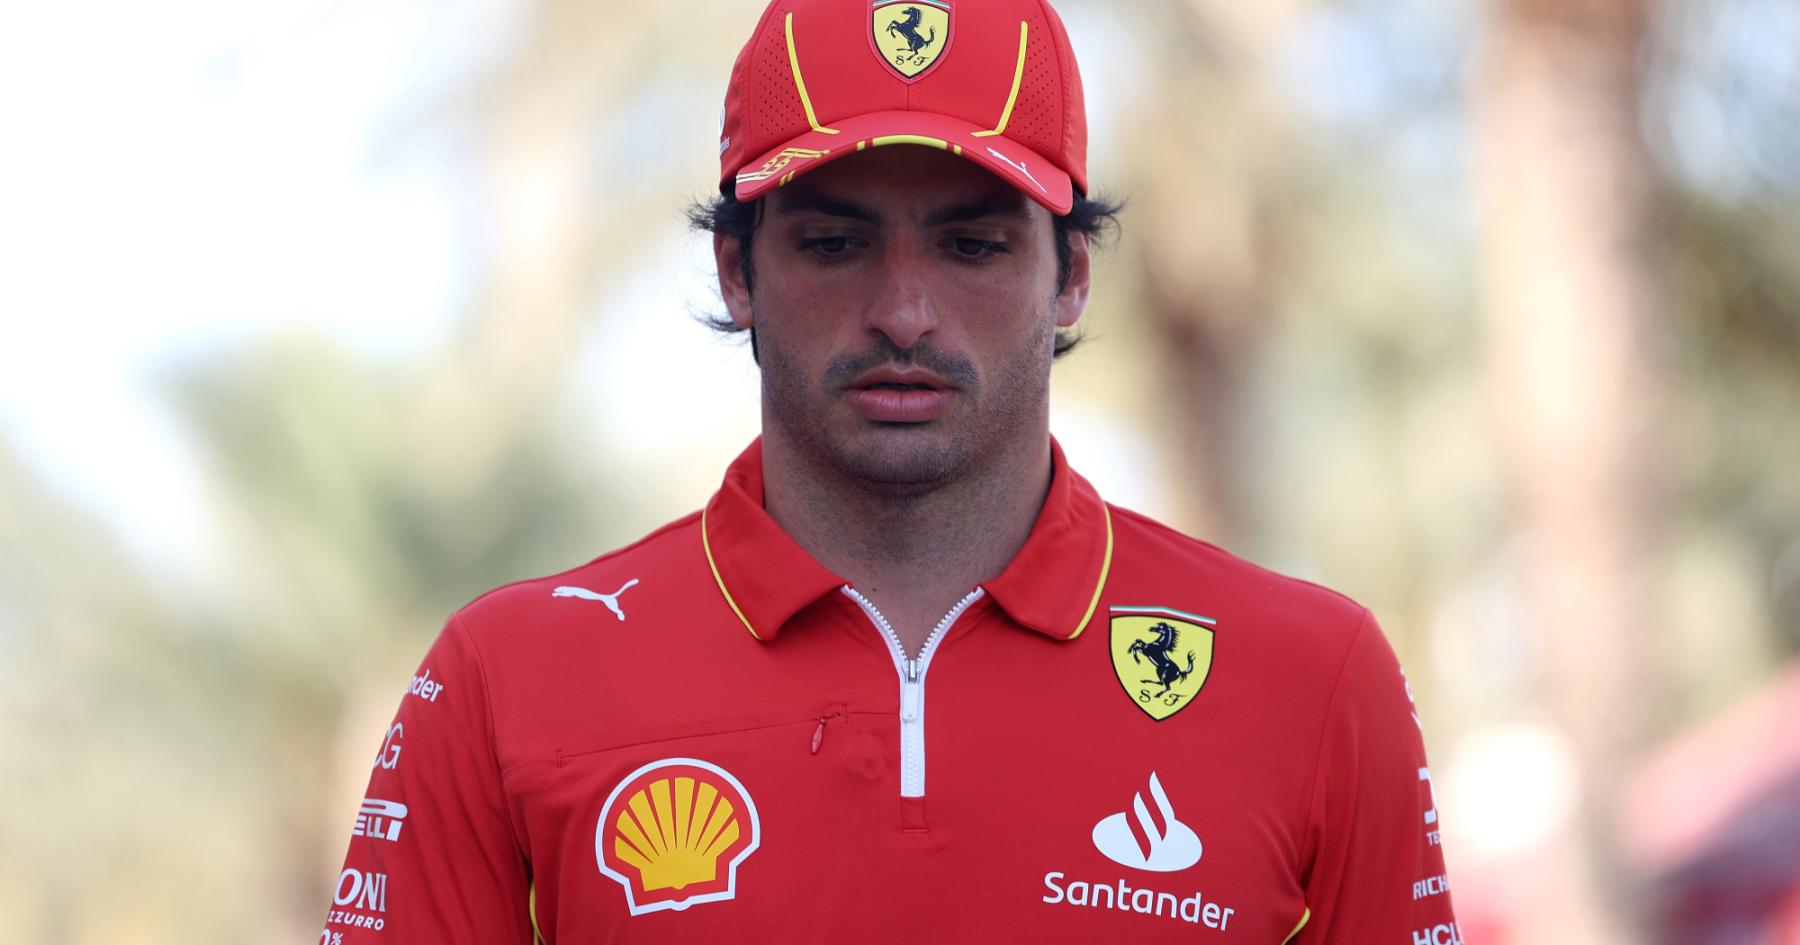 Sainz Recovers: Ferrari Unveils Crucial Update In Response to Driver's Surgery